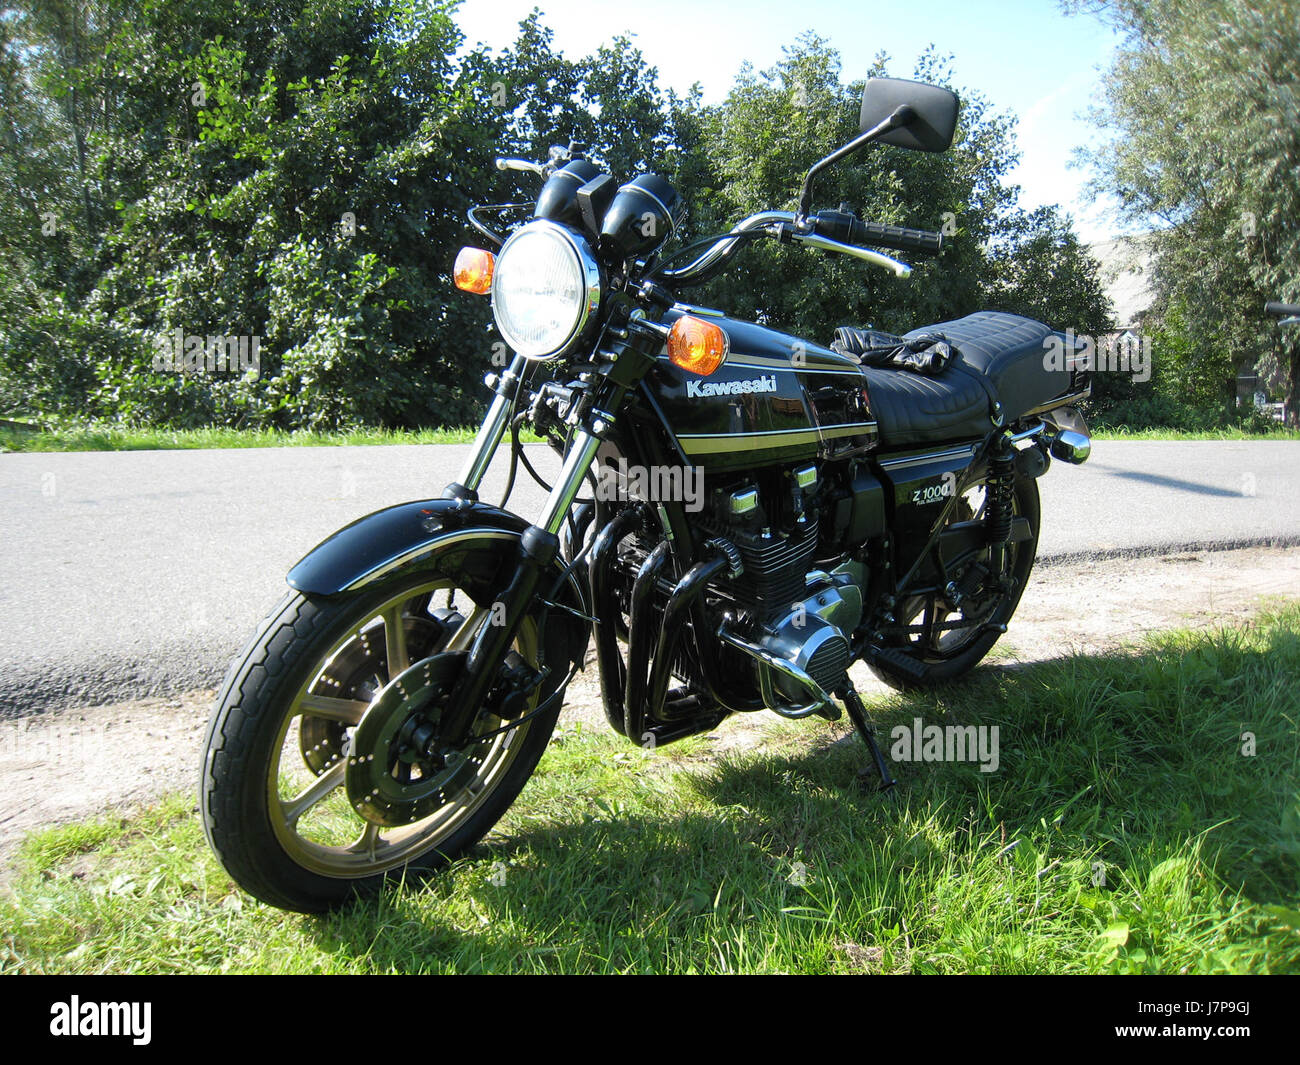 1980 Z 1000 H1 injection picture 003 Stock Photo - Alamy